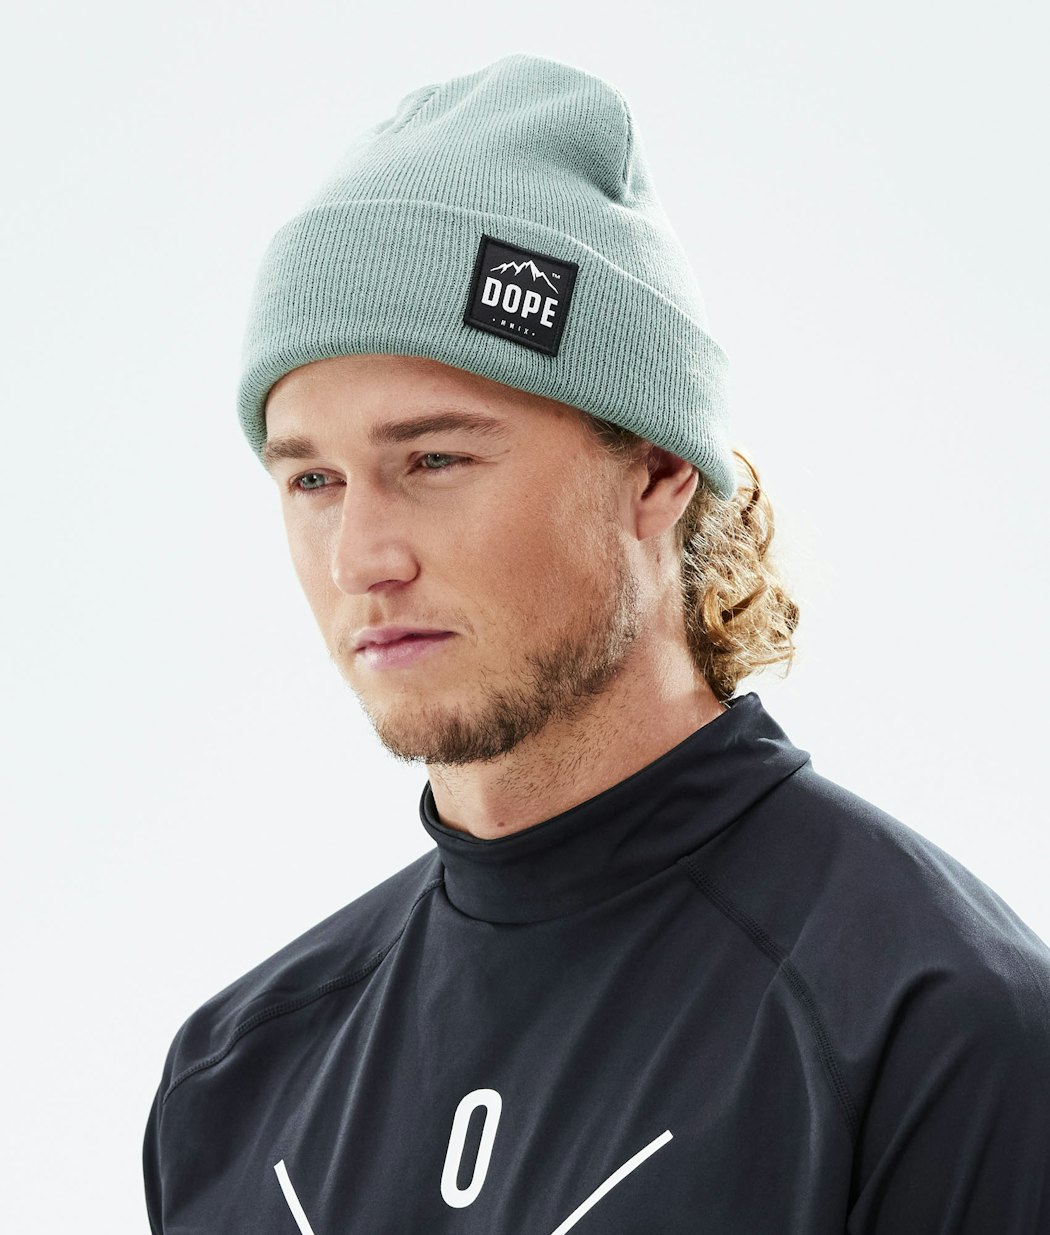 Dope Paradise Men's Beanie Faded Green